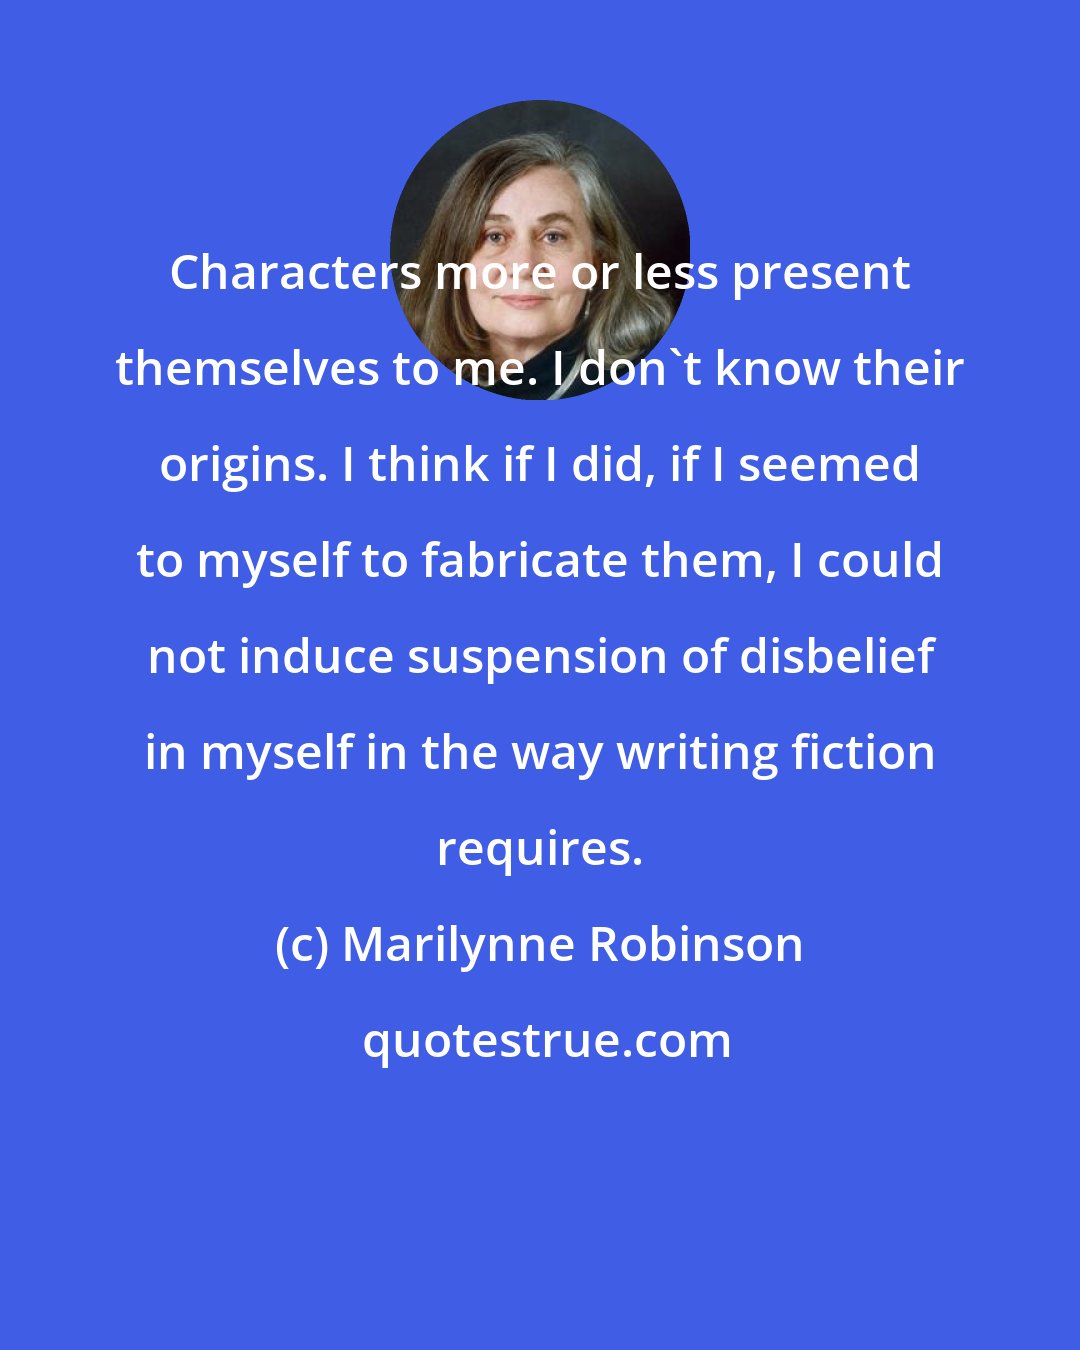 Marilynne Robinson: Characters more or less present themselves to me. I don't know their origins. I think if I did, if I seemed to myself to fabricate them, I could not induce suspension of disbelief in myself in the way writing fiction requires.